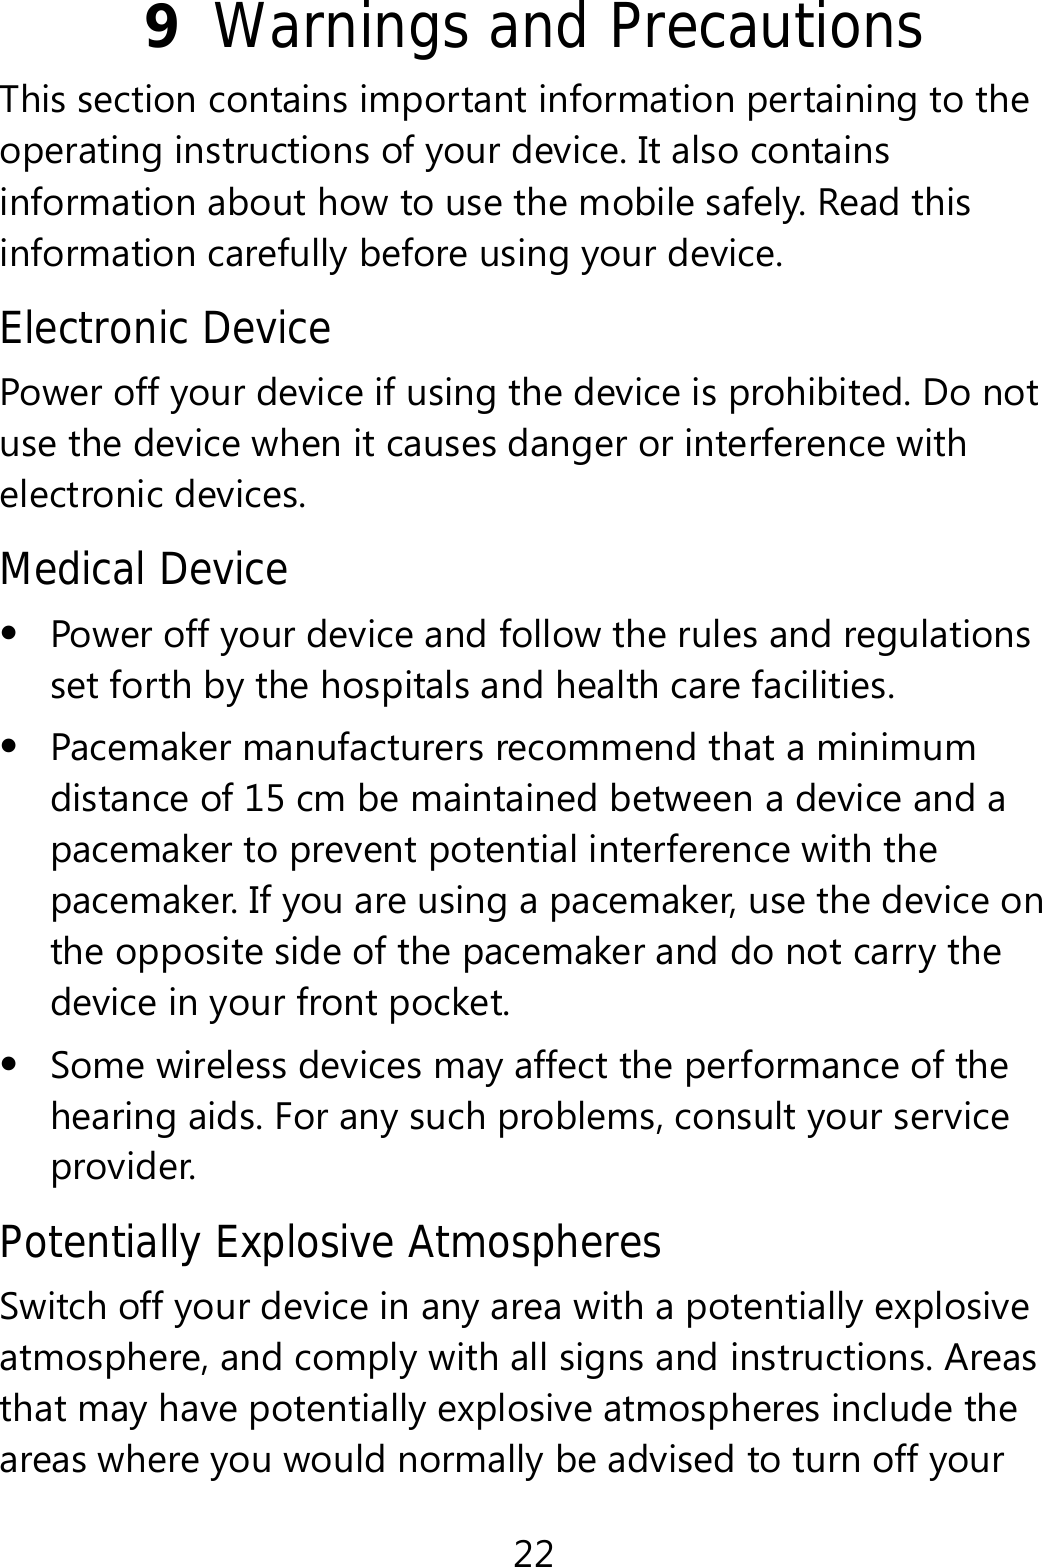 22 9  Warnings and Precautions This section contains important information pertaining to the operating instructions of your device. It also contains information about how to use the mobile safely. Read this information carefully before using your device. Electronic Device Power off your device if using the device is prohibited. Do not use the device when it causes danger or interference with electronic devices. Medical Device  Power off your device and follow the rules and regulations set forth by the hospitals and health care facilities.  Pacemaker manufacturers recommend that a minimum distance of 15 cm be maintained between a device and a pacemaker to prevent potential interference with the pacemaker. If you are using a pacemaker, use the device on the opposite side of the pacemaker and do not carry the device in your front pocket.  Some wireless devices may affect the performance of the hearing aids. For any such problems, consult your service provider. Potentially Explosive Atmospheres Switch off your device in any area with a potentially explosive atmosphere, and comply with all signs and instructions. Areas that may have potentially explosive atmospheres include the areas where you would normally be advised to turn off your 